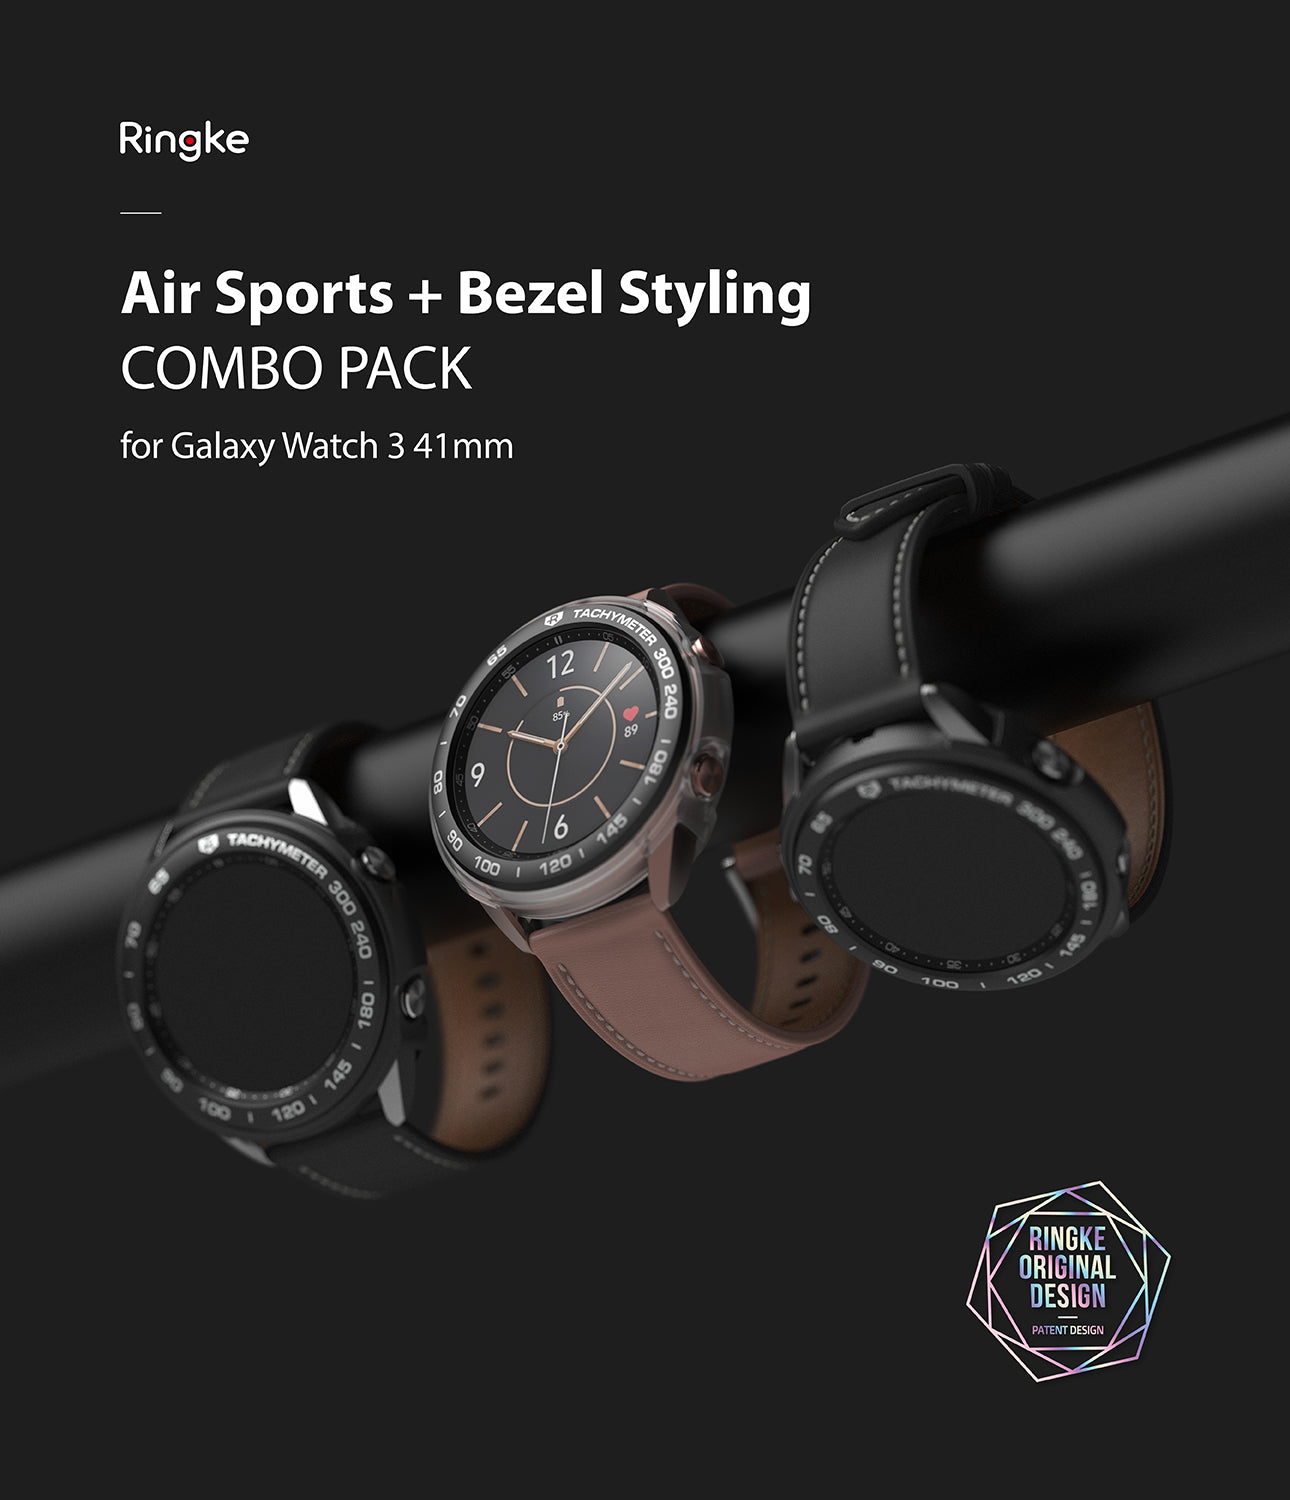 ringke air sports + bezel styling combo pack for samsung galaxy watch 3 41mm - black + 10